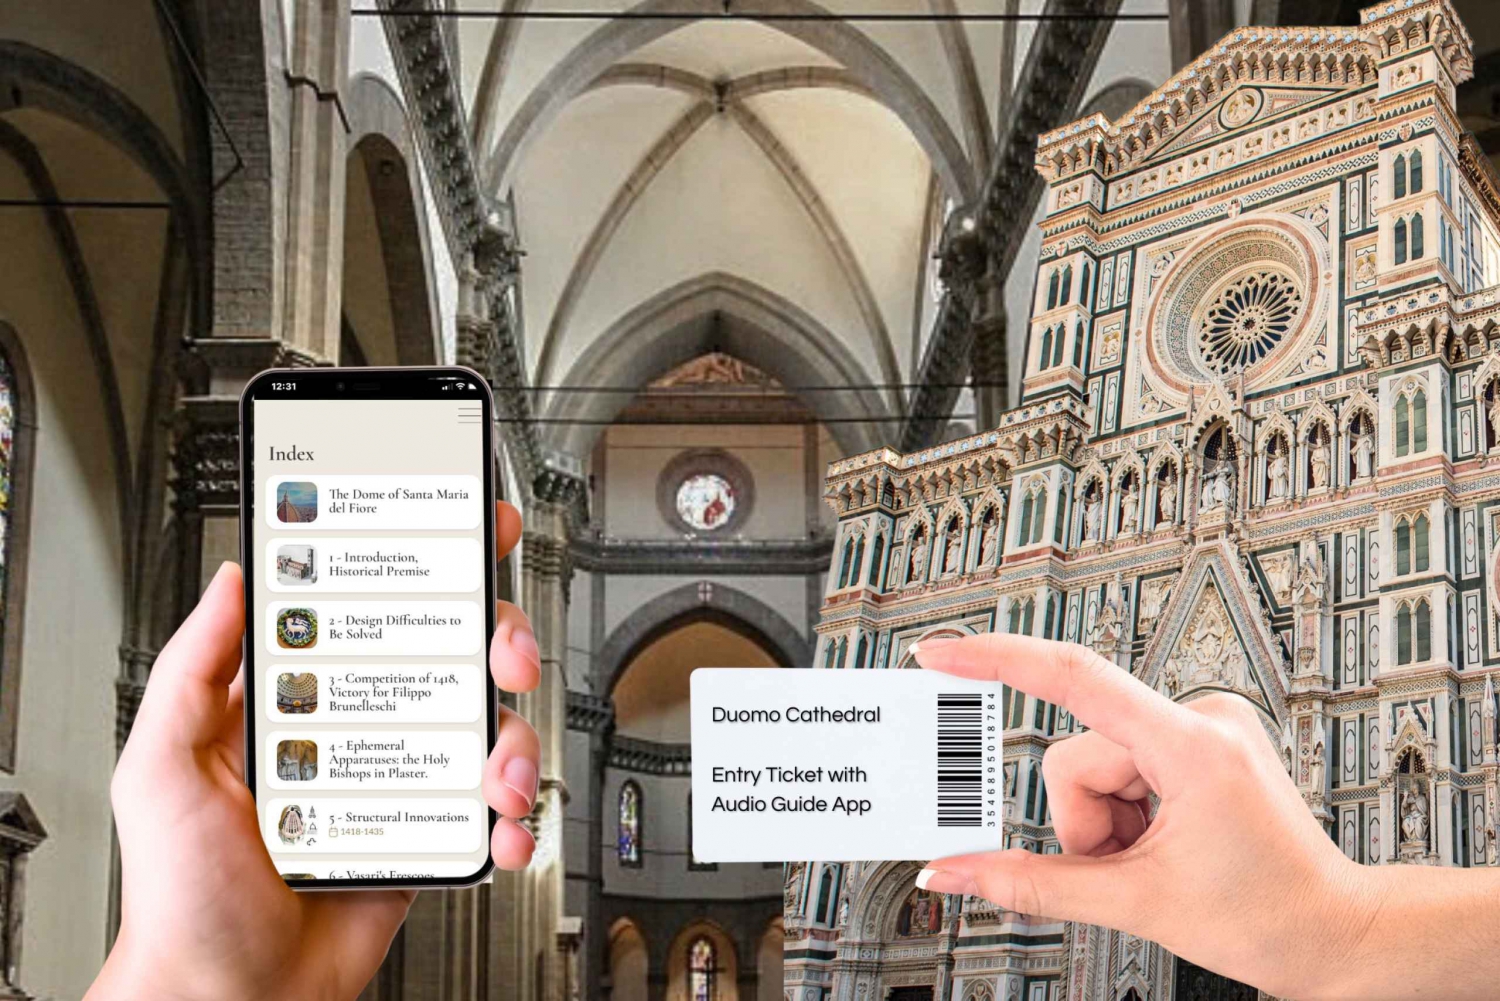 Firenze: Baptistery, Cathedral, Museum Ticket & AudioApp: Baptistery, Cathedral, Museum Ticket & AudioApp